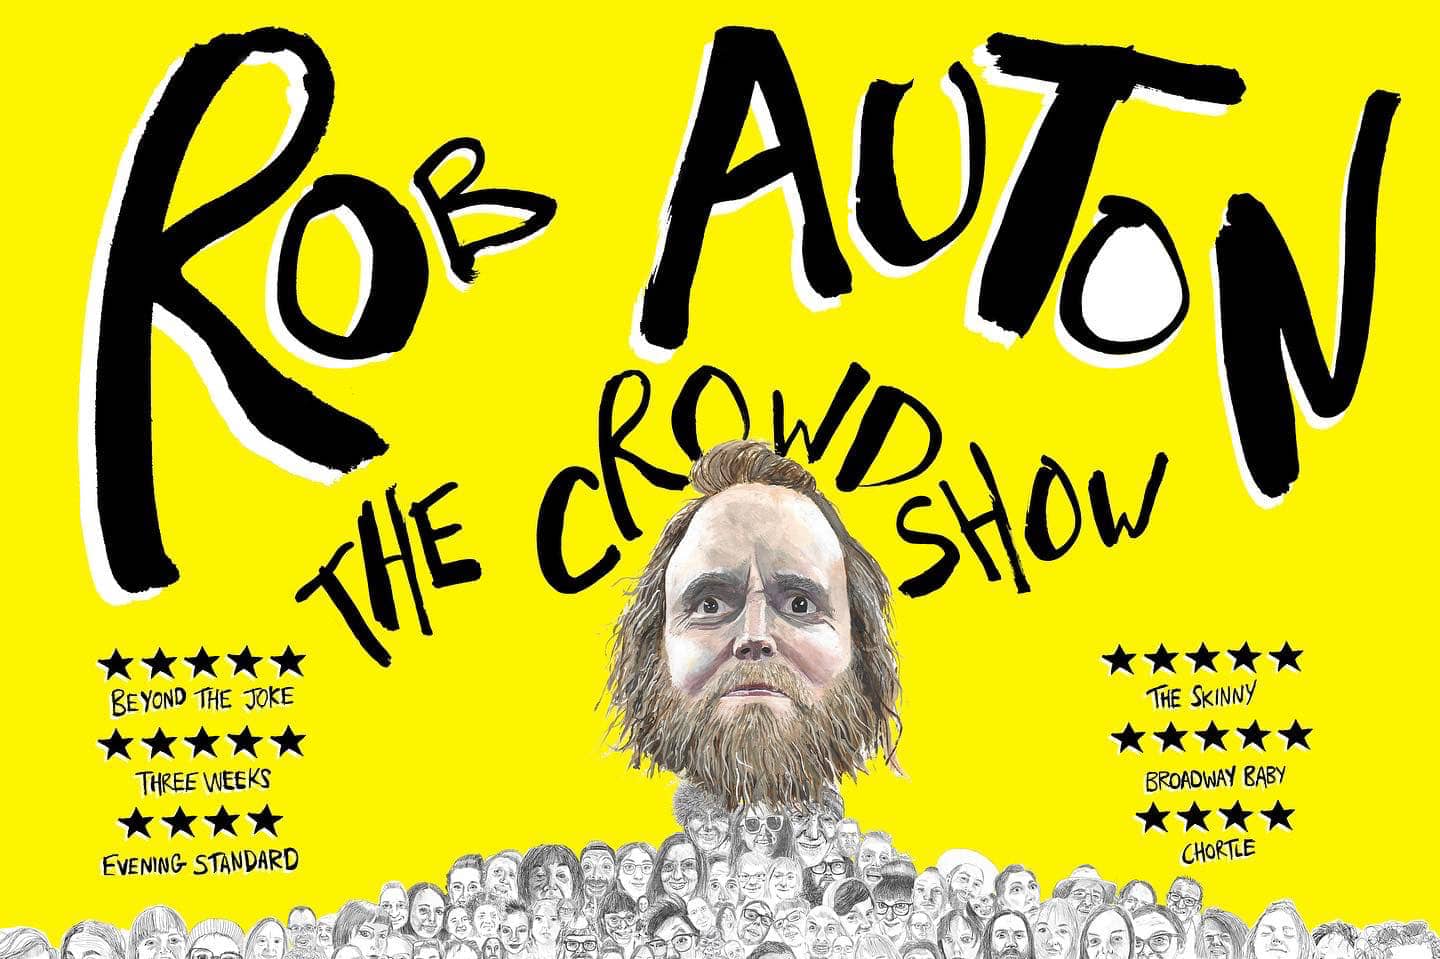 Poster for the Rob Auton Crowd Show with illustration of his head surrounded by star ratings